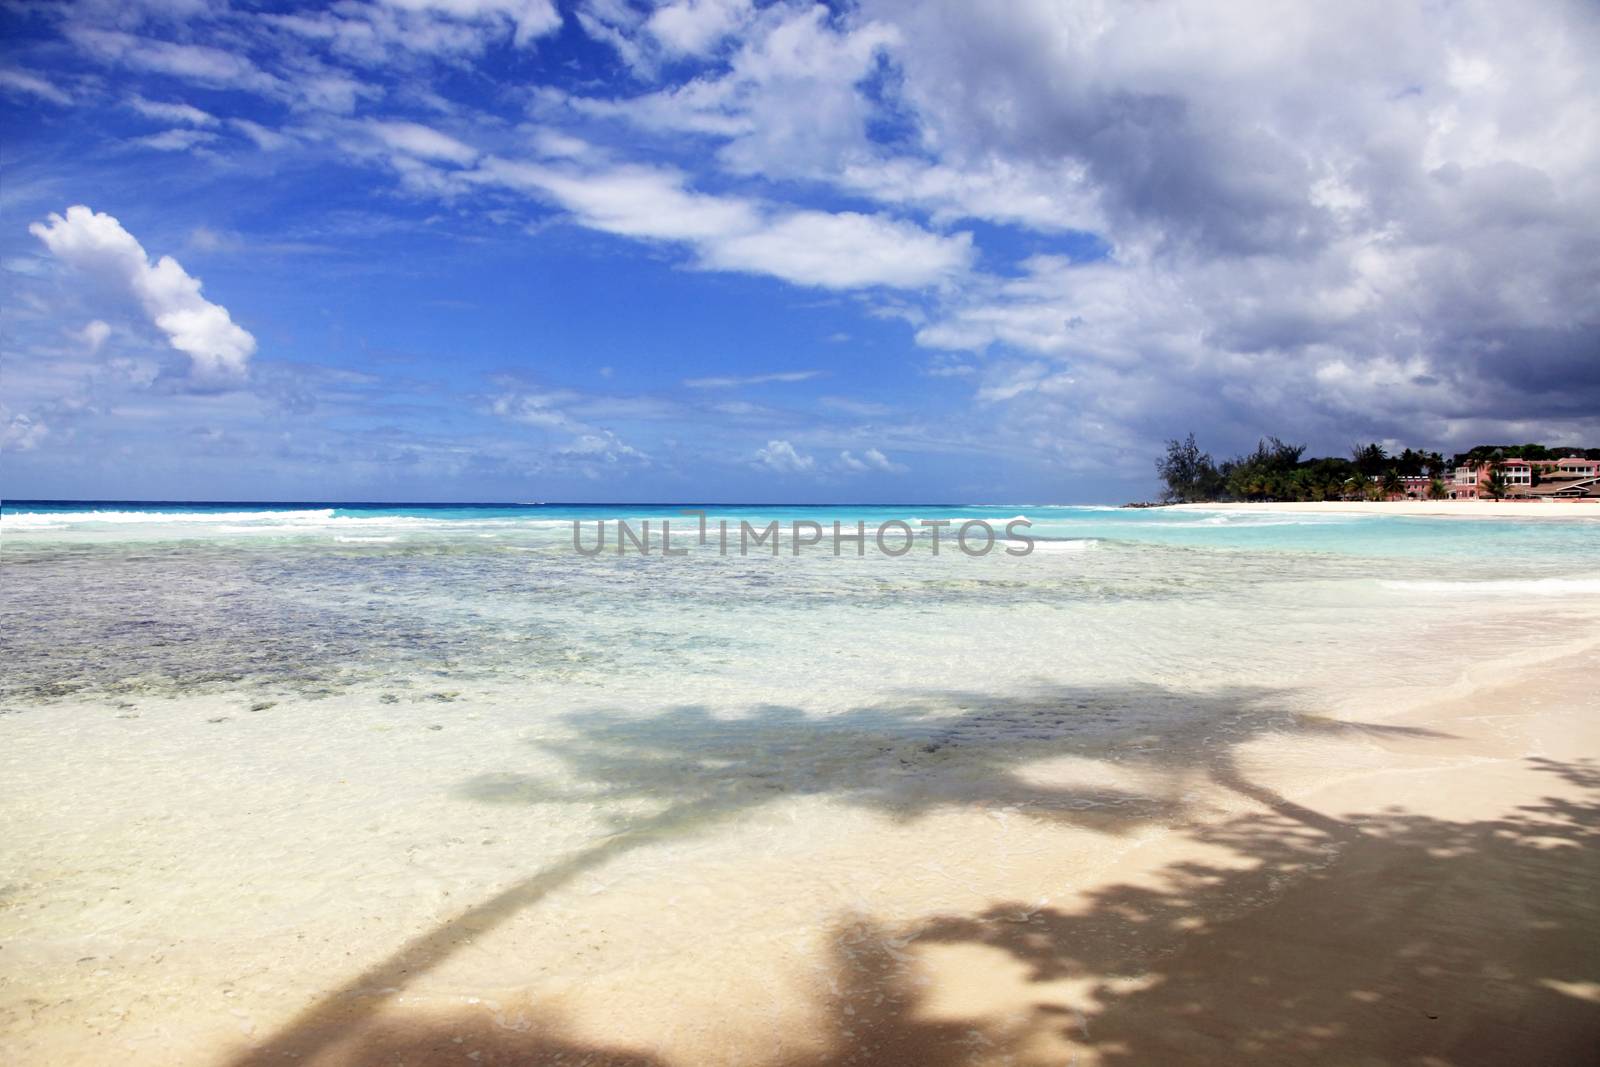 Tropical beach with a palm tree in Barbados